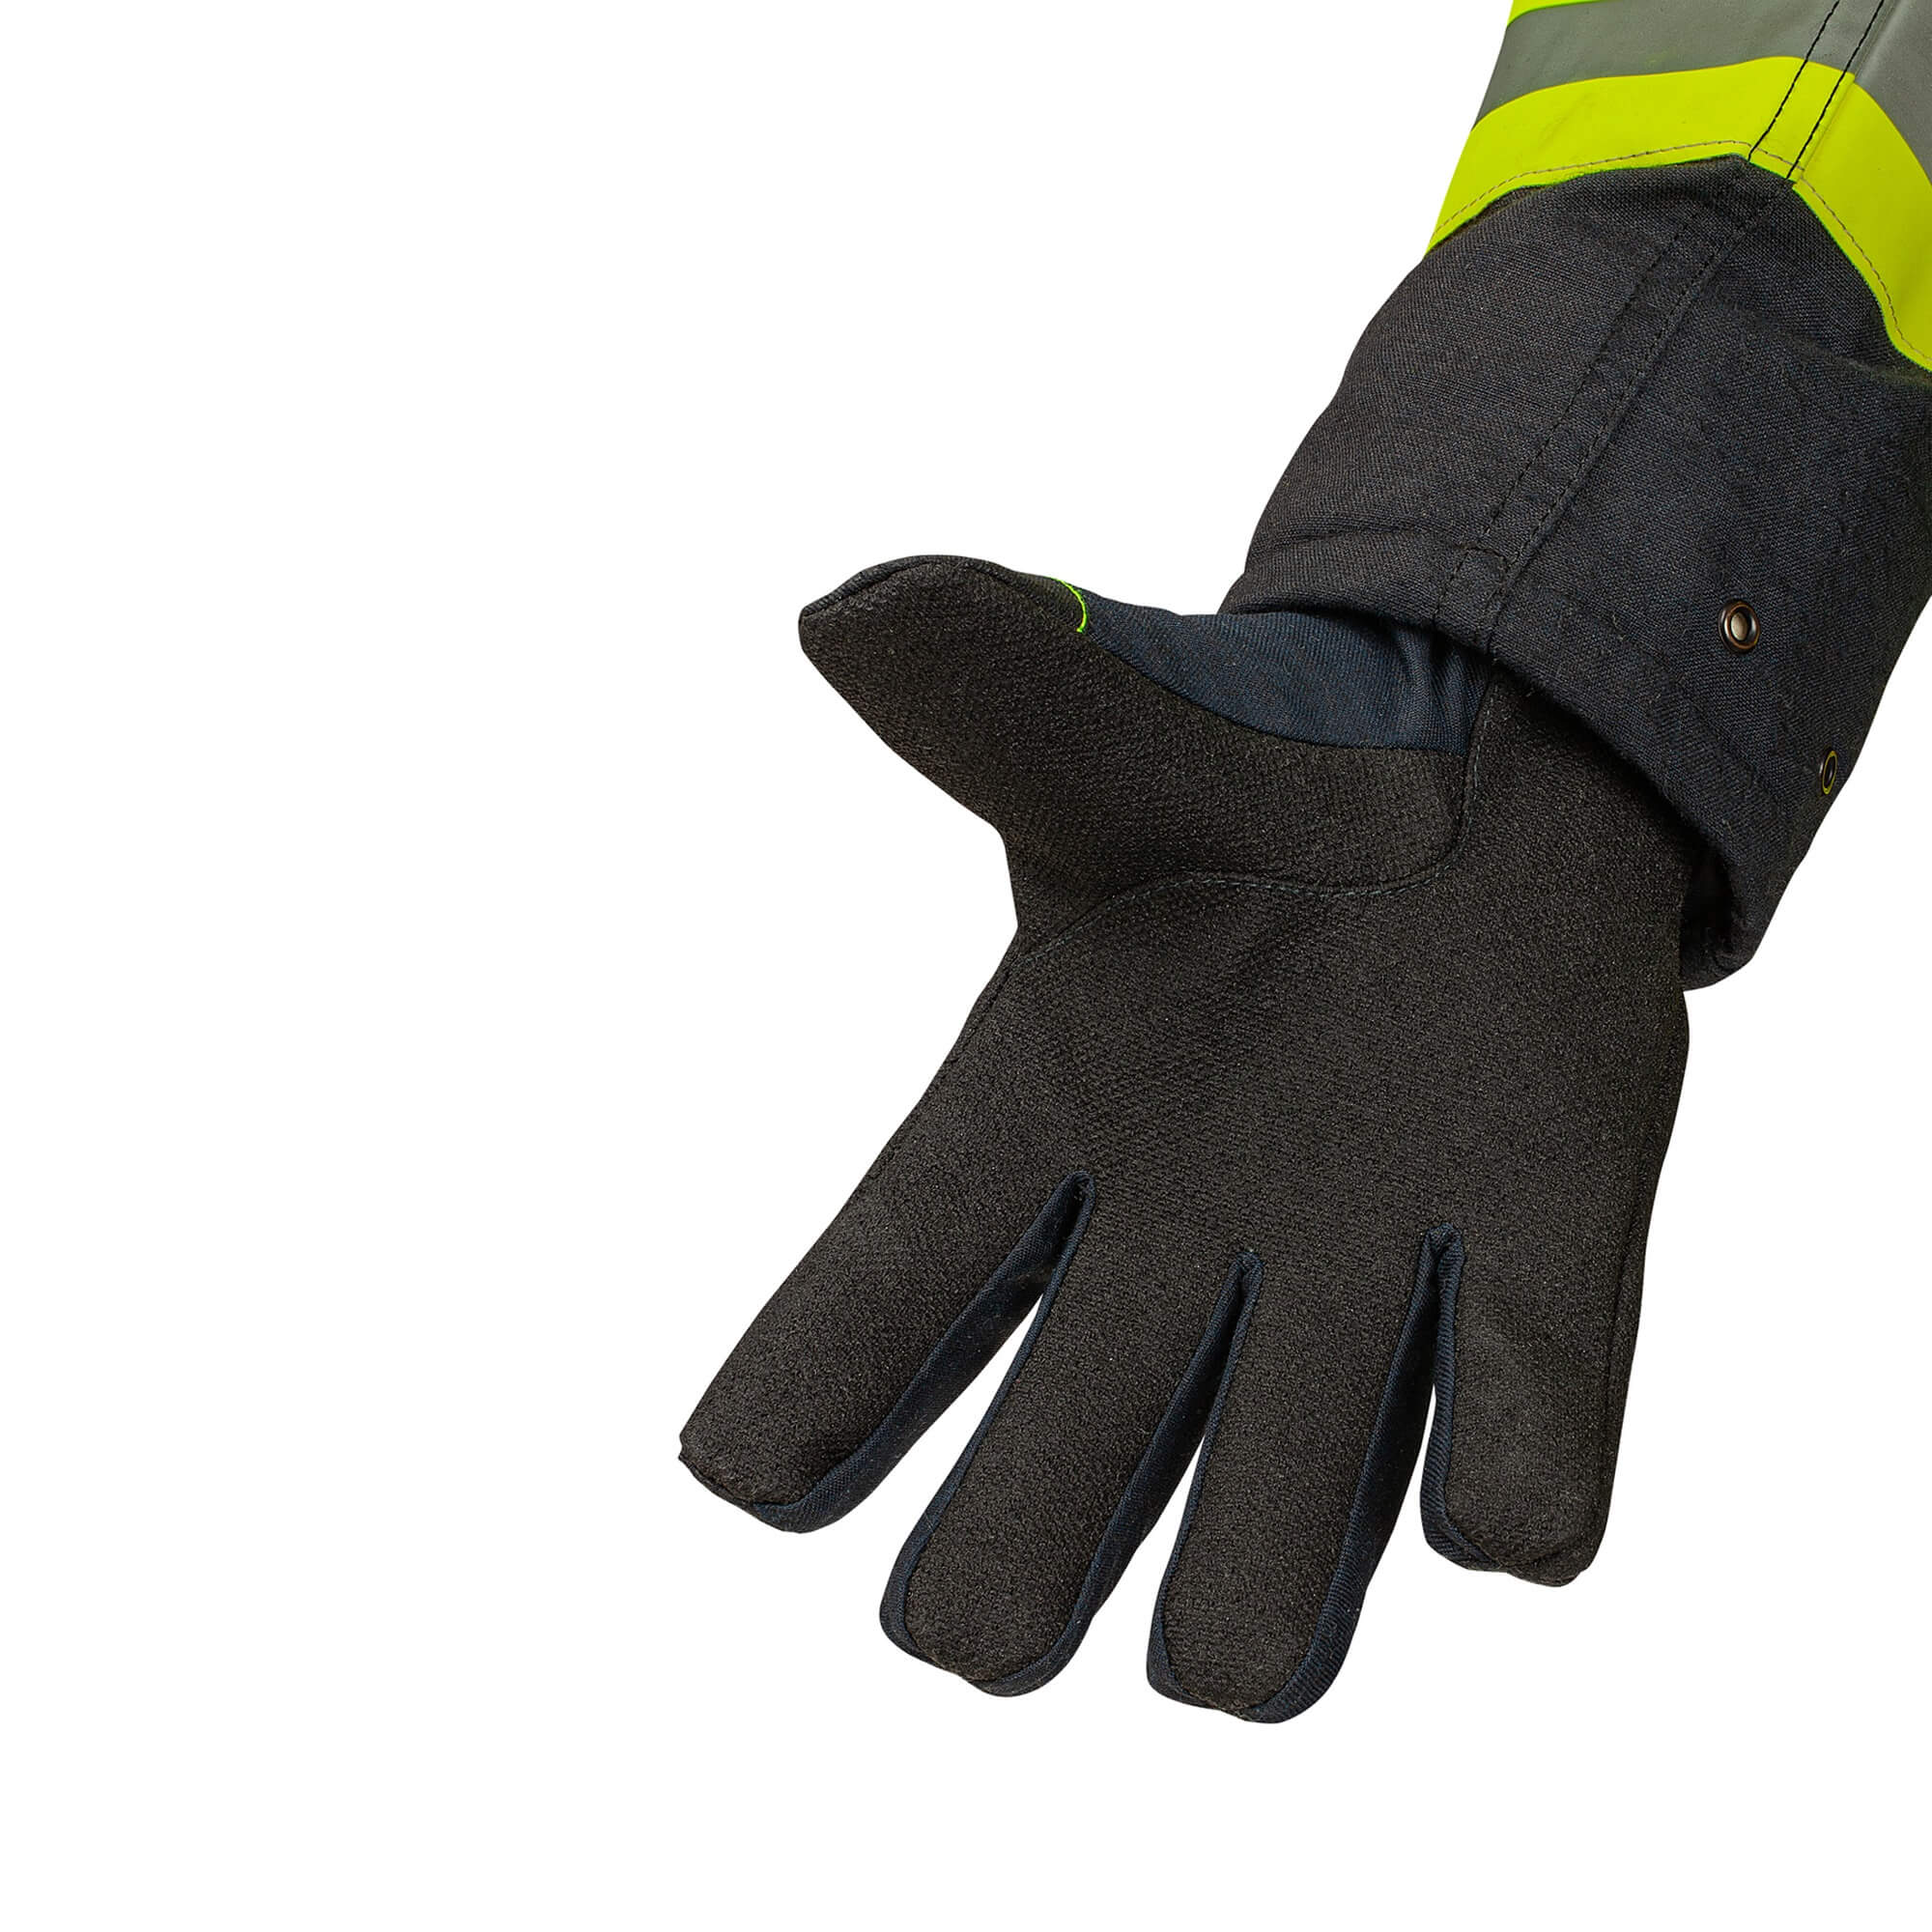 Protective gloves for firefighters Diamond Easy